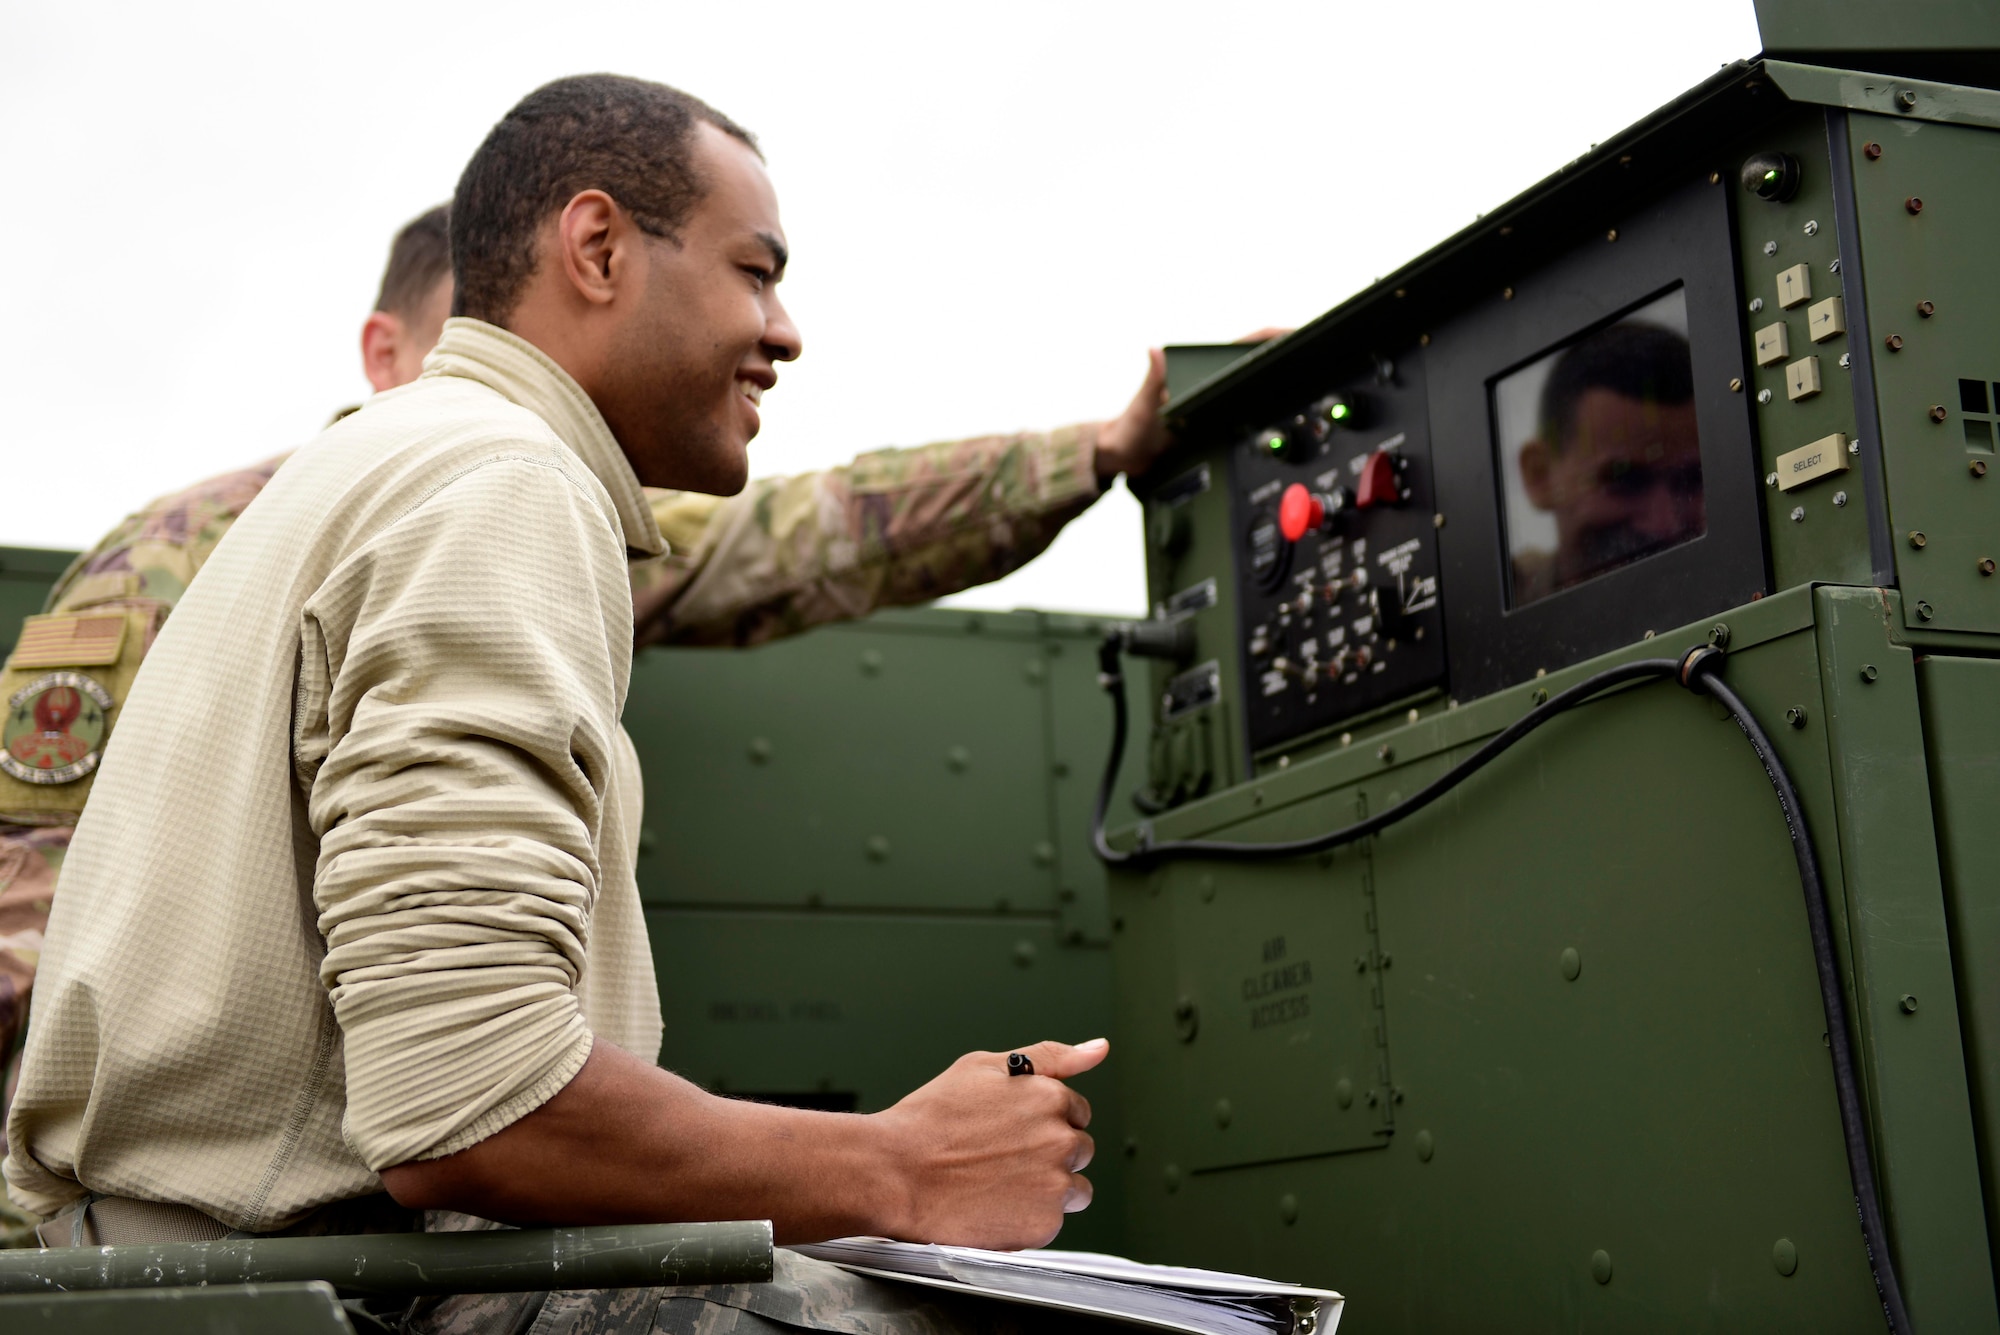 Senior Airman Jordan Boddie, 606th Air Control Squadron vehicular maintenance journeyman, takes meter readings from a generator at Pula Airport, Croatia, May 28, 2019. When the 606th deploys, generators like these can support an entire radar site. (U.S. Air Force photo by Staff Sgt. Tory Cusimano)